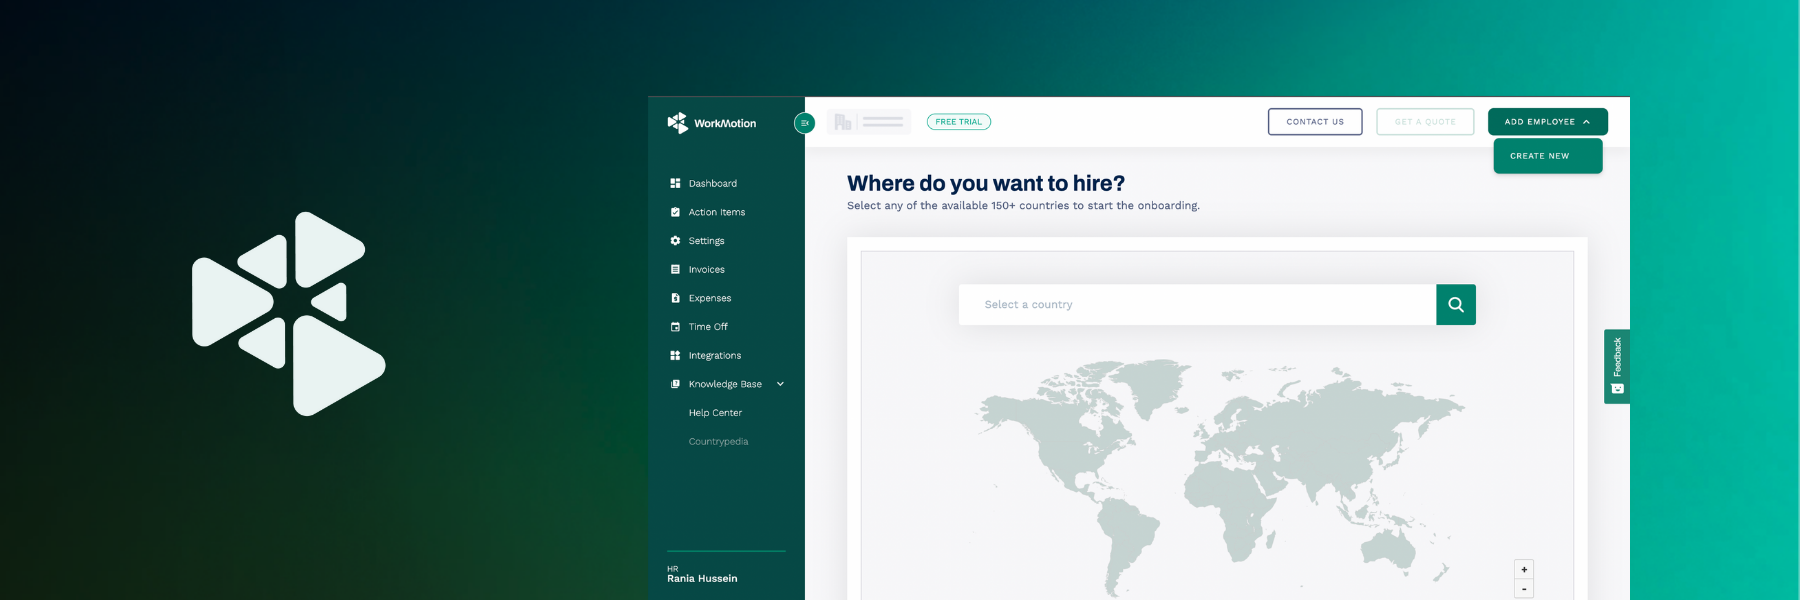 Review WorkMotion: Hire talent anywhere with 100% compliance - Appvizer